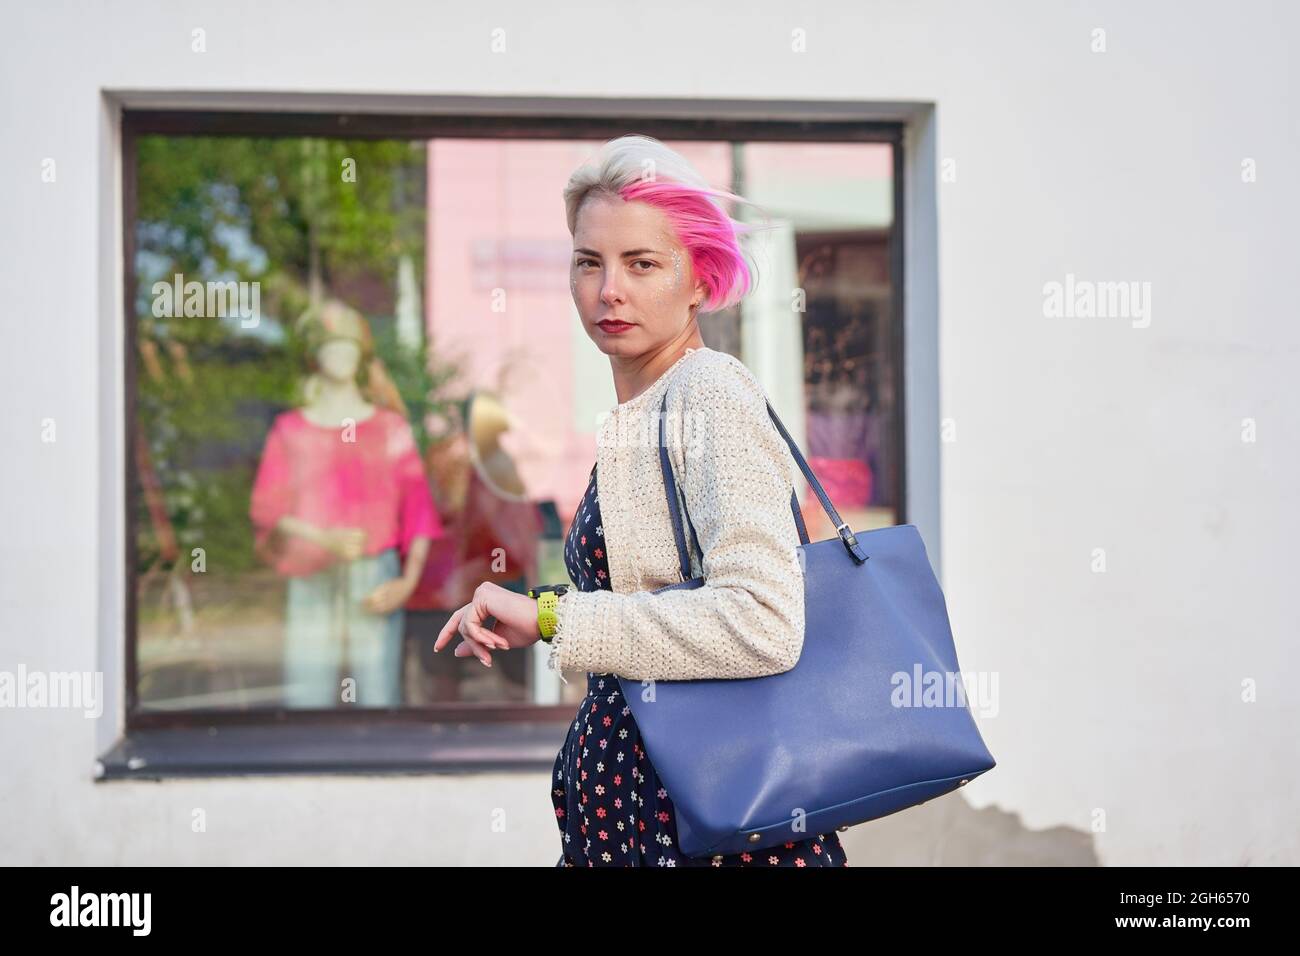 Side view of trendy informal female with dyed hair walking on street and looking at camera Stock Photo